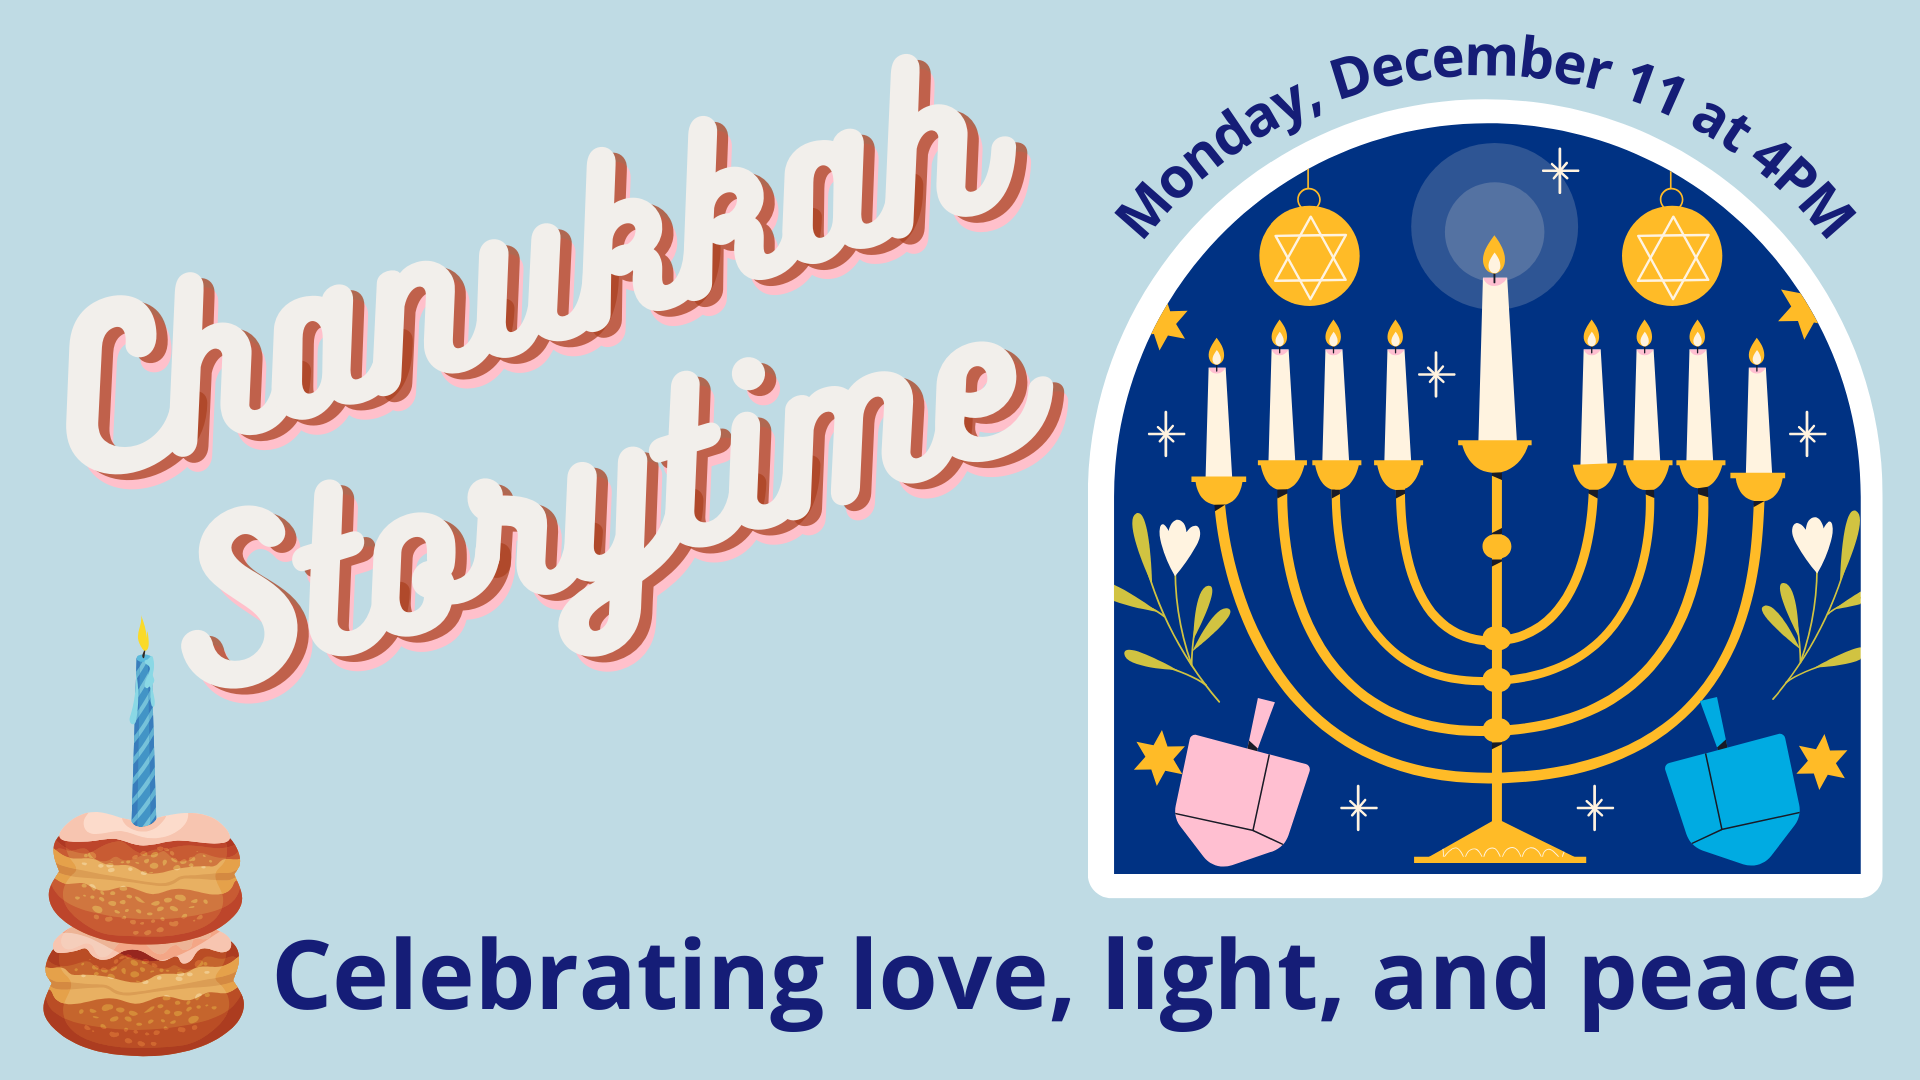 Chanukkah Storytime on the left with a menorah on the right